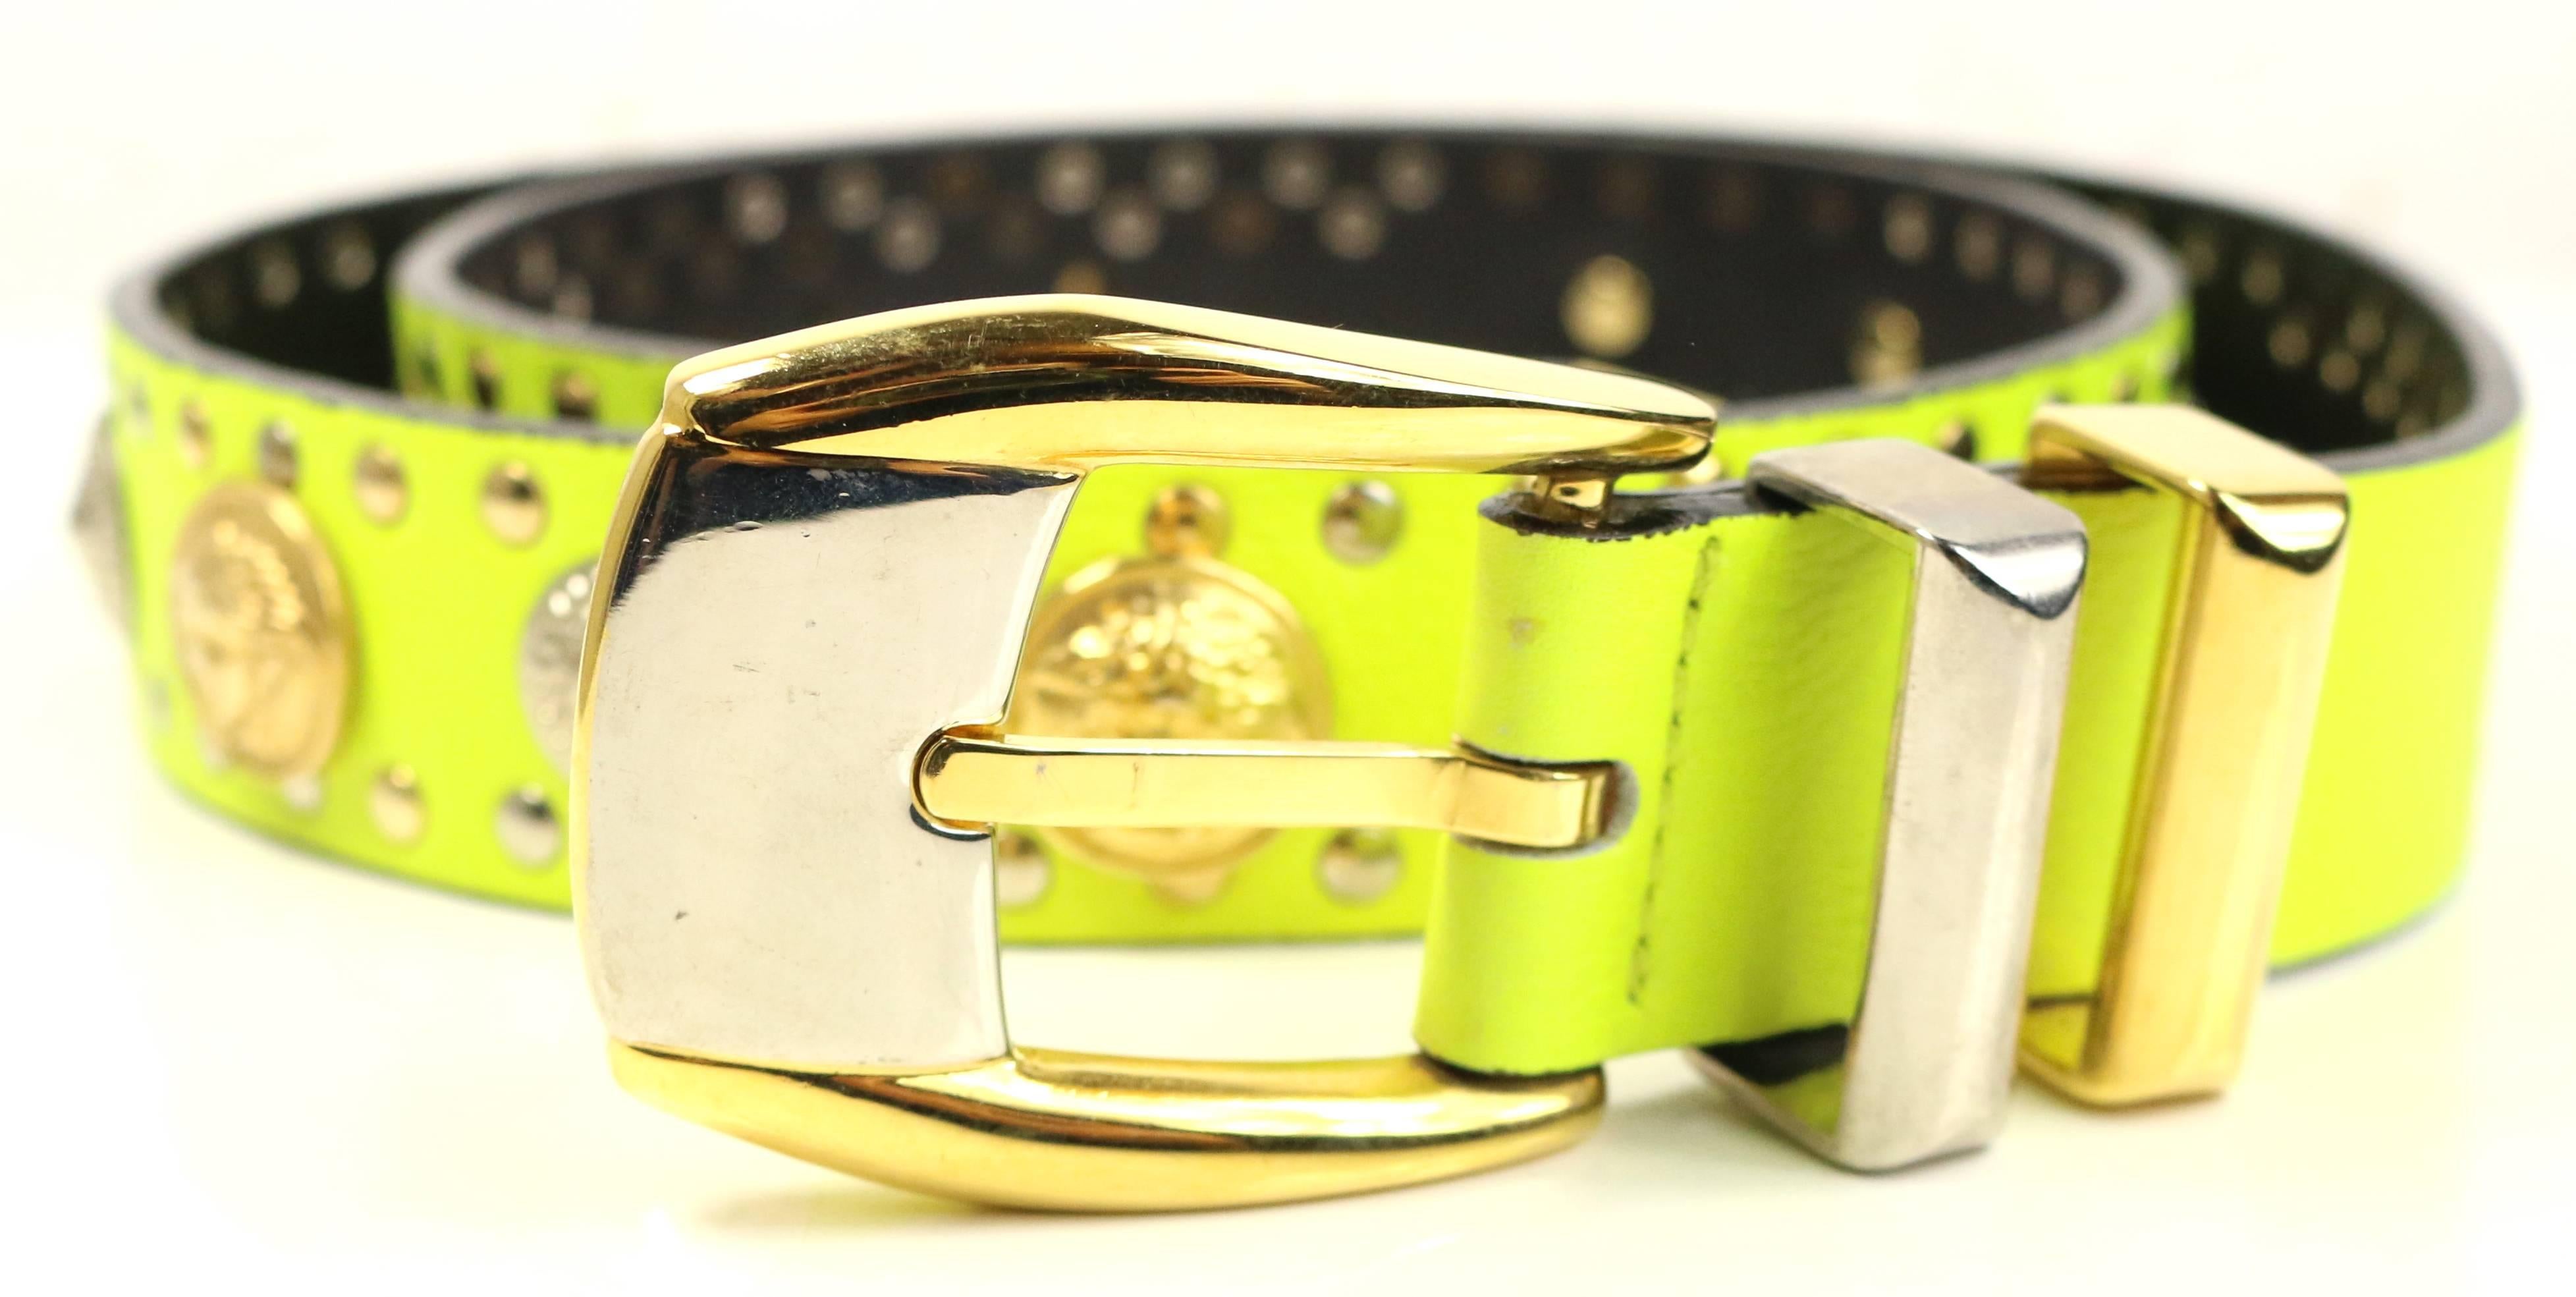 - Vintage 90s Gianni Versace neon green/yellow lambskin leather with gold and silver studs belt. 

- Featuring embedded gold toned Medusa and silver toned shield studs. 

- Gold and silver toned hardware buckle fastening. 

- 37 inches long and 1.5